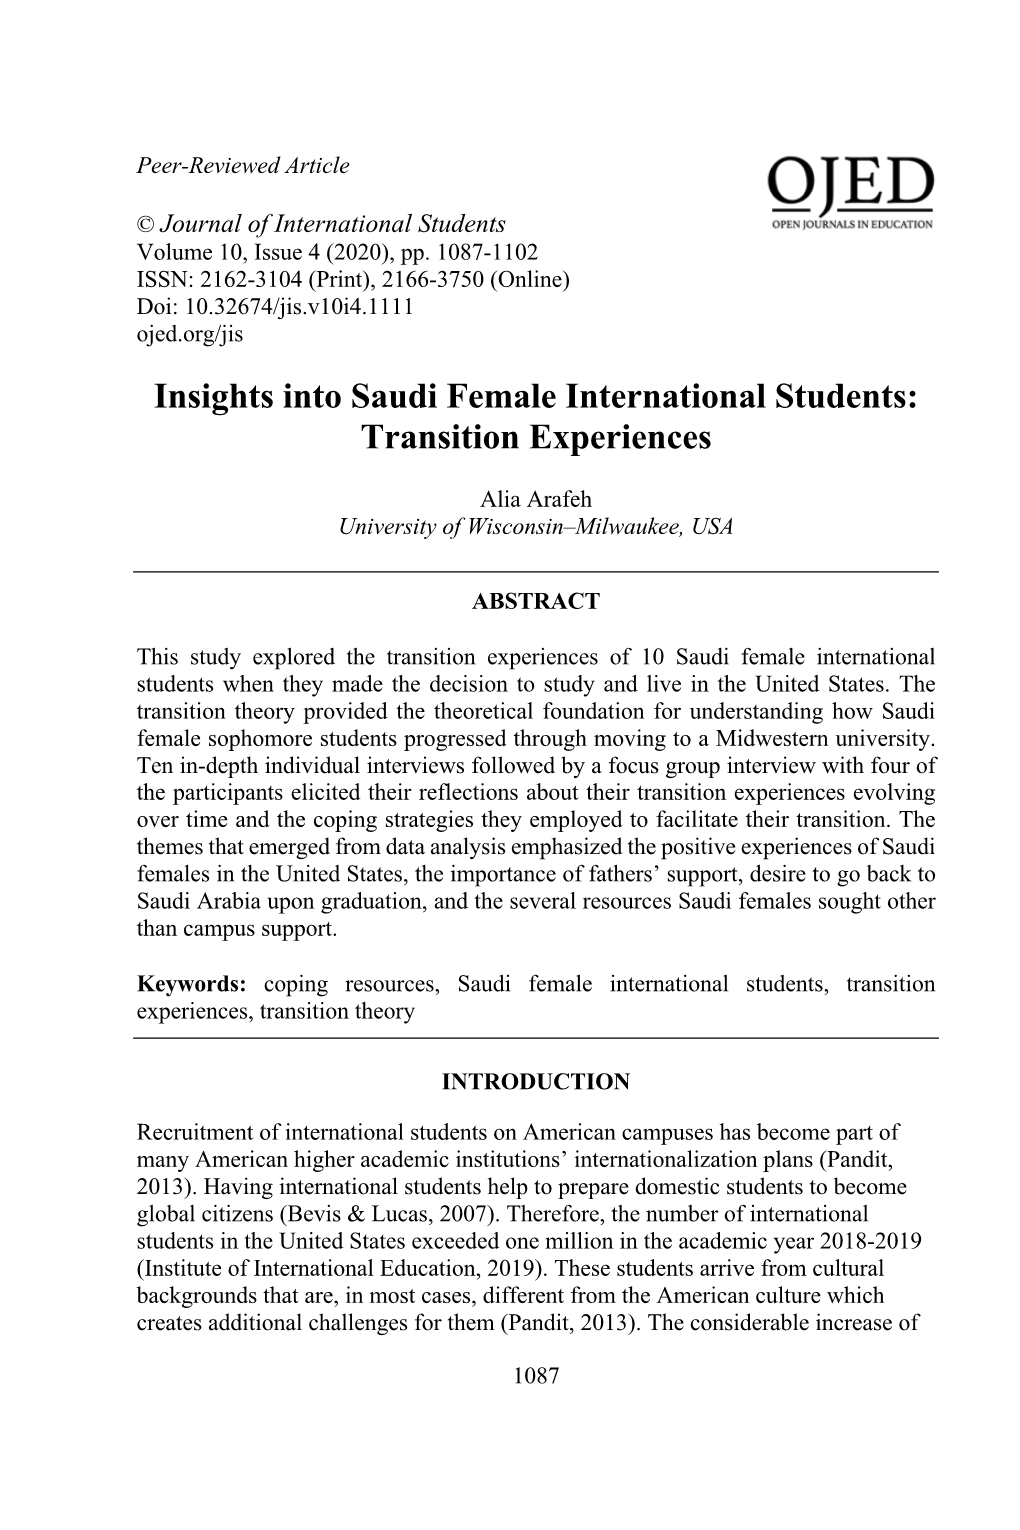 Insights Into Saudi Female International Students: Transition Experiences